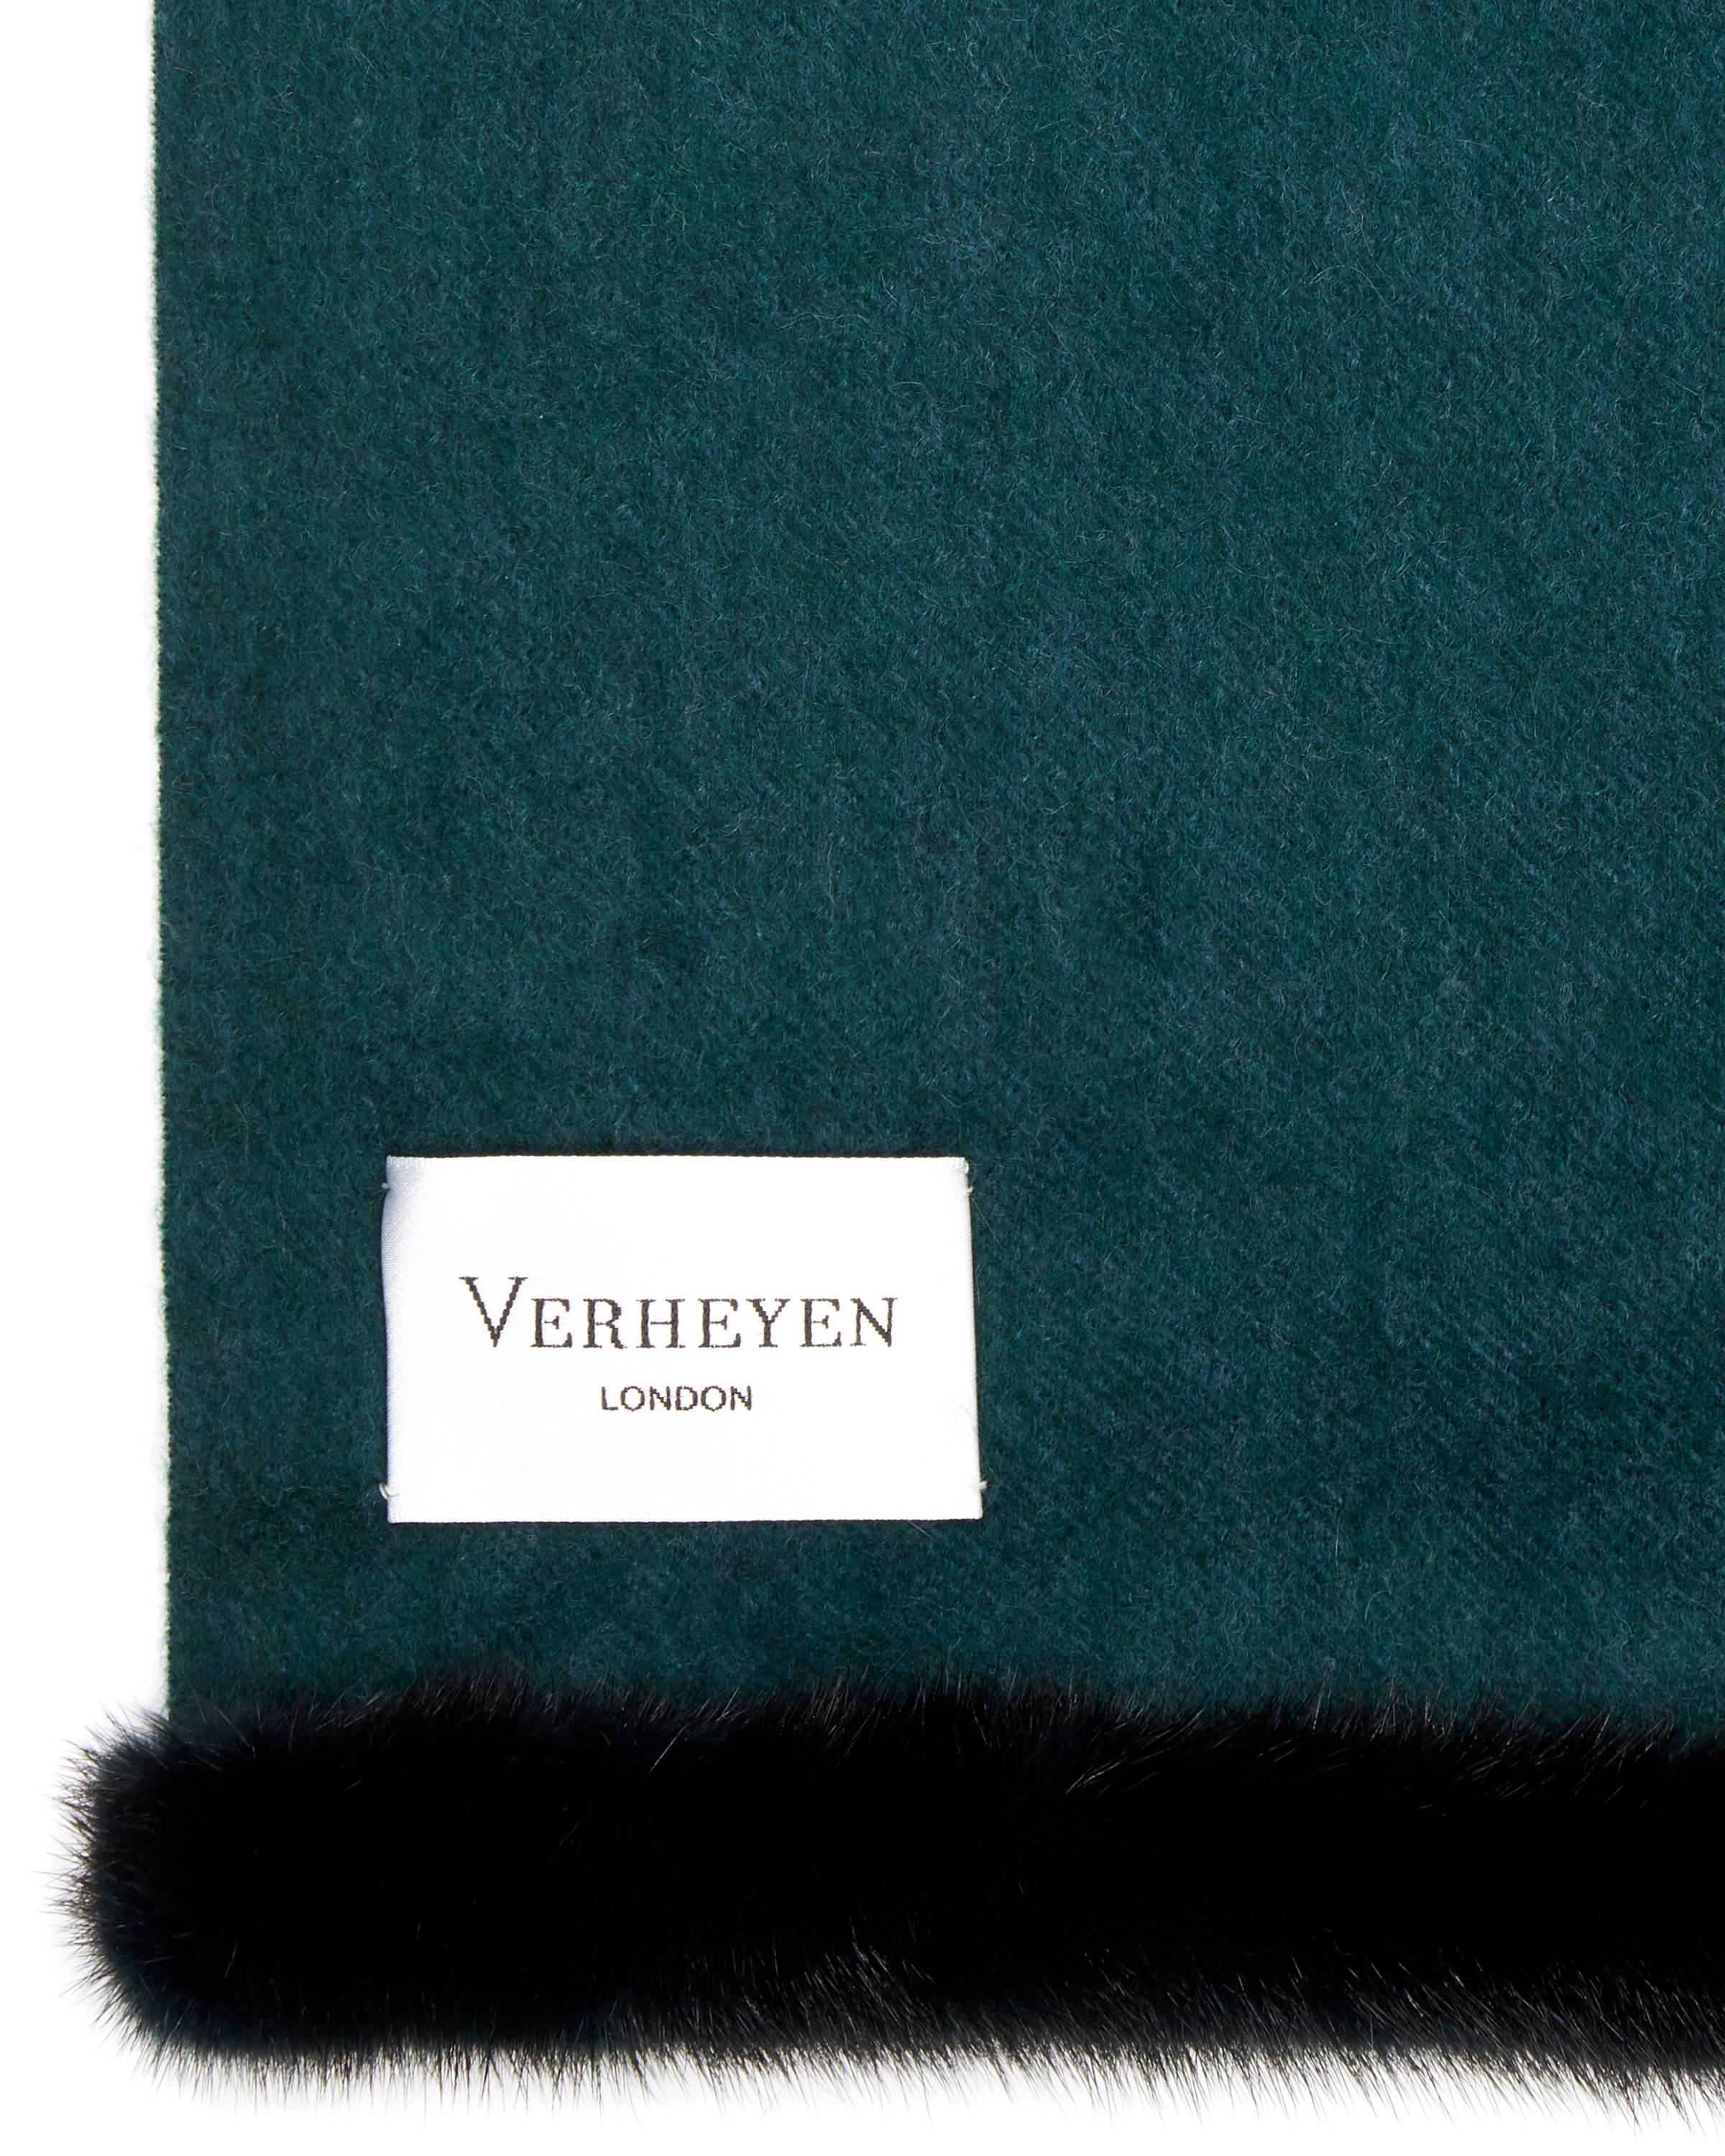 Verheyen London’s shawl is spun from the finest Scottish woven cashmere and finished with the most exquisite dyed mink. Its warmth envelopes you with luxury, perfect for travel and comfort wherever you are.

PRODUCT DETAILS
Verheyen London Cashmere